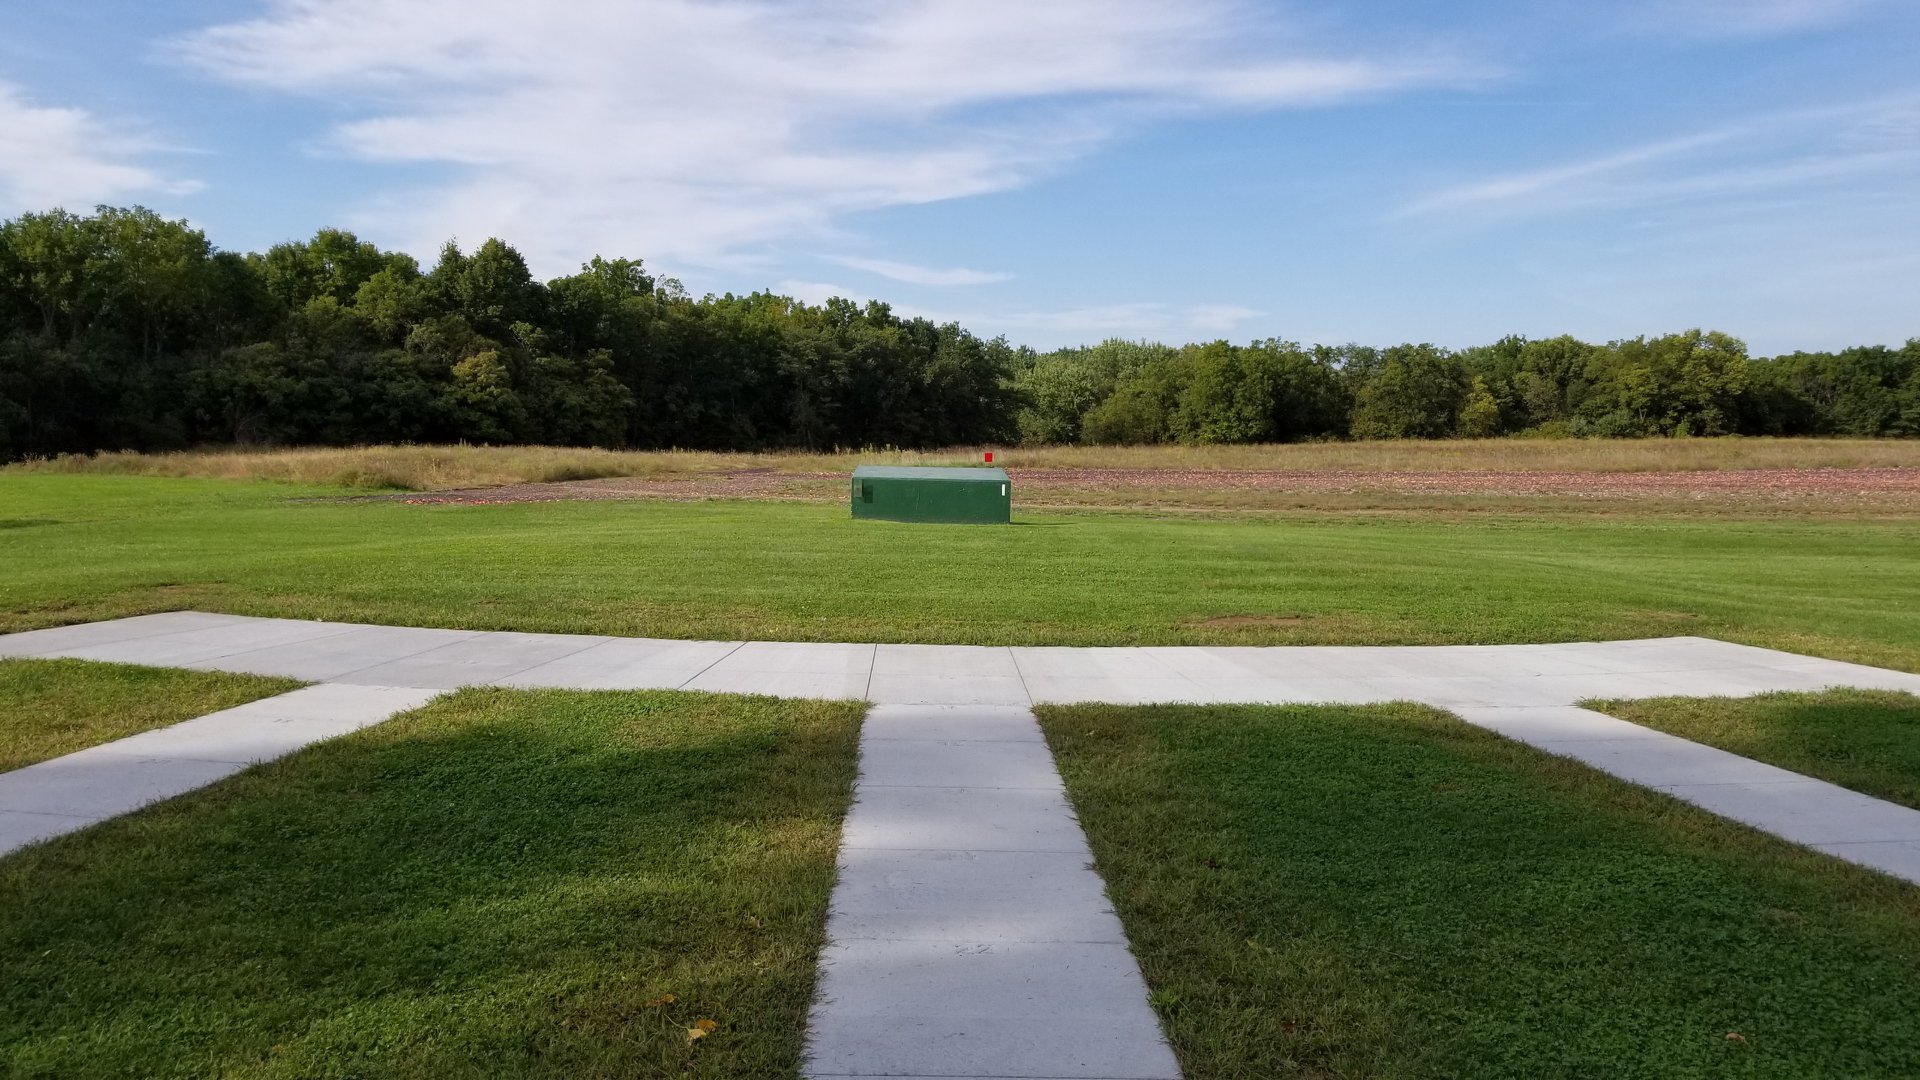 View of Trap 1 background from 27 yard line